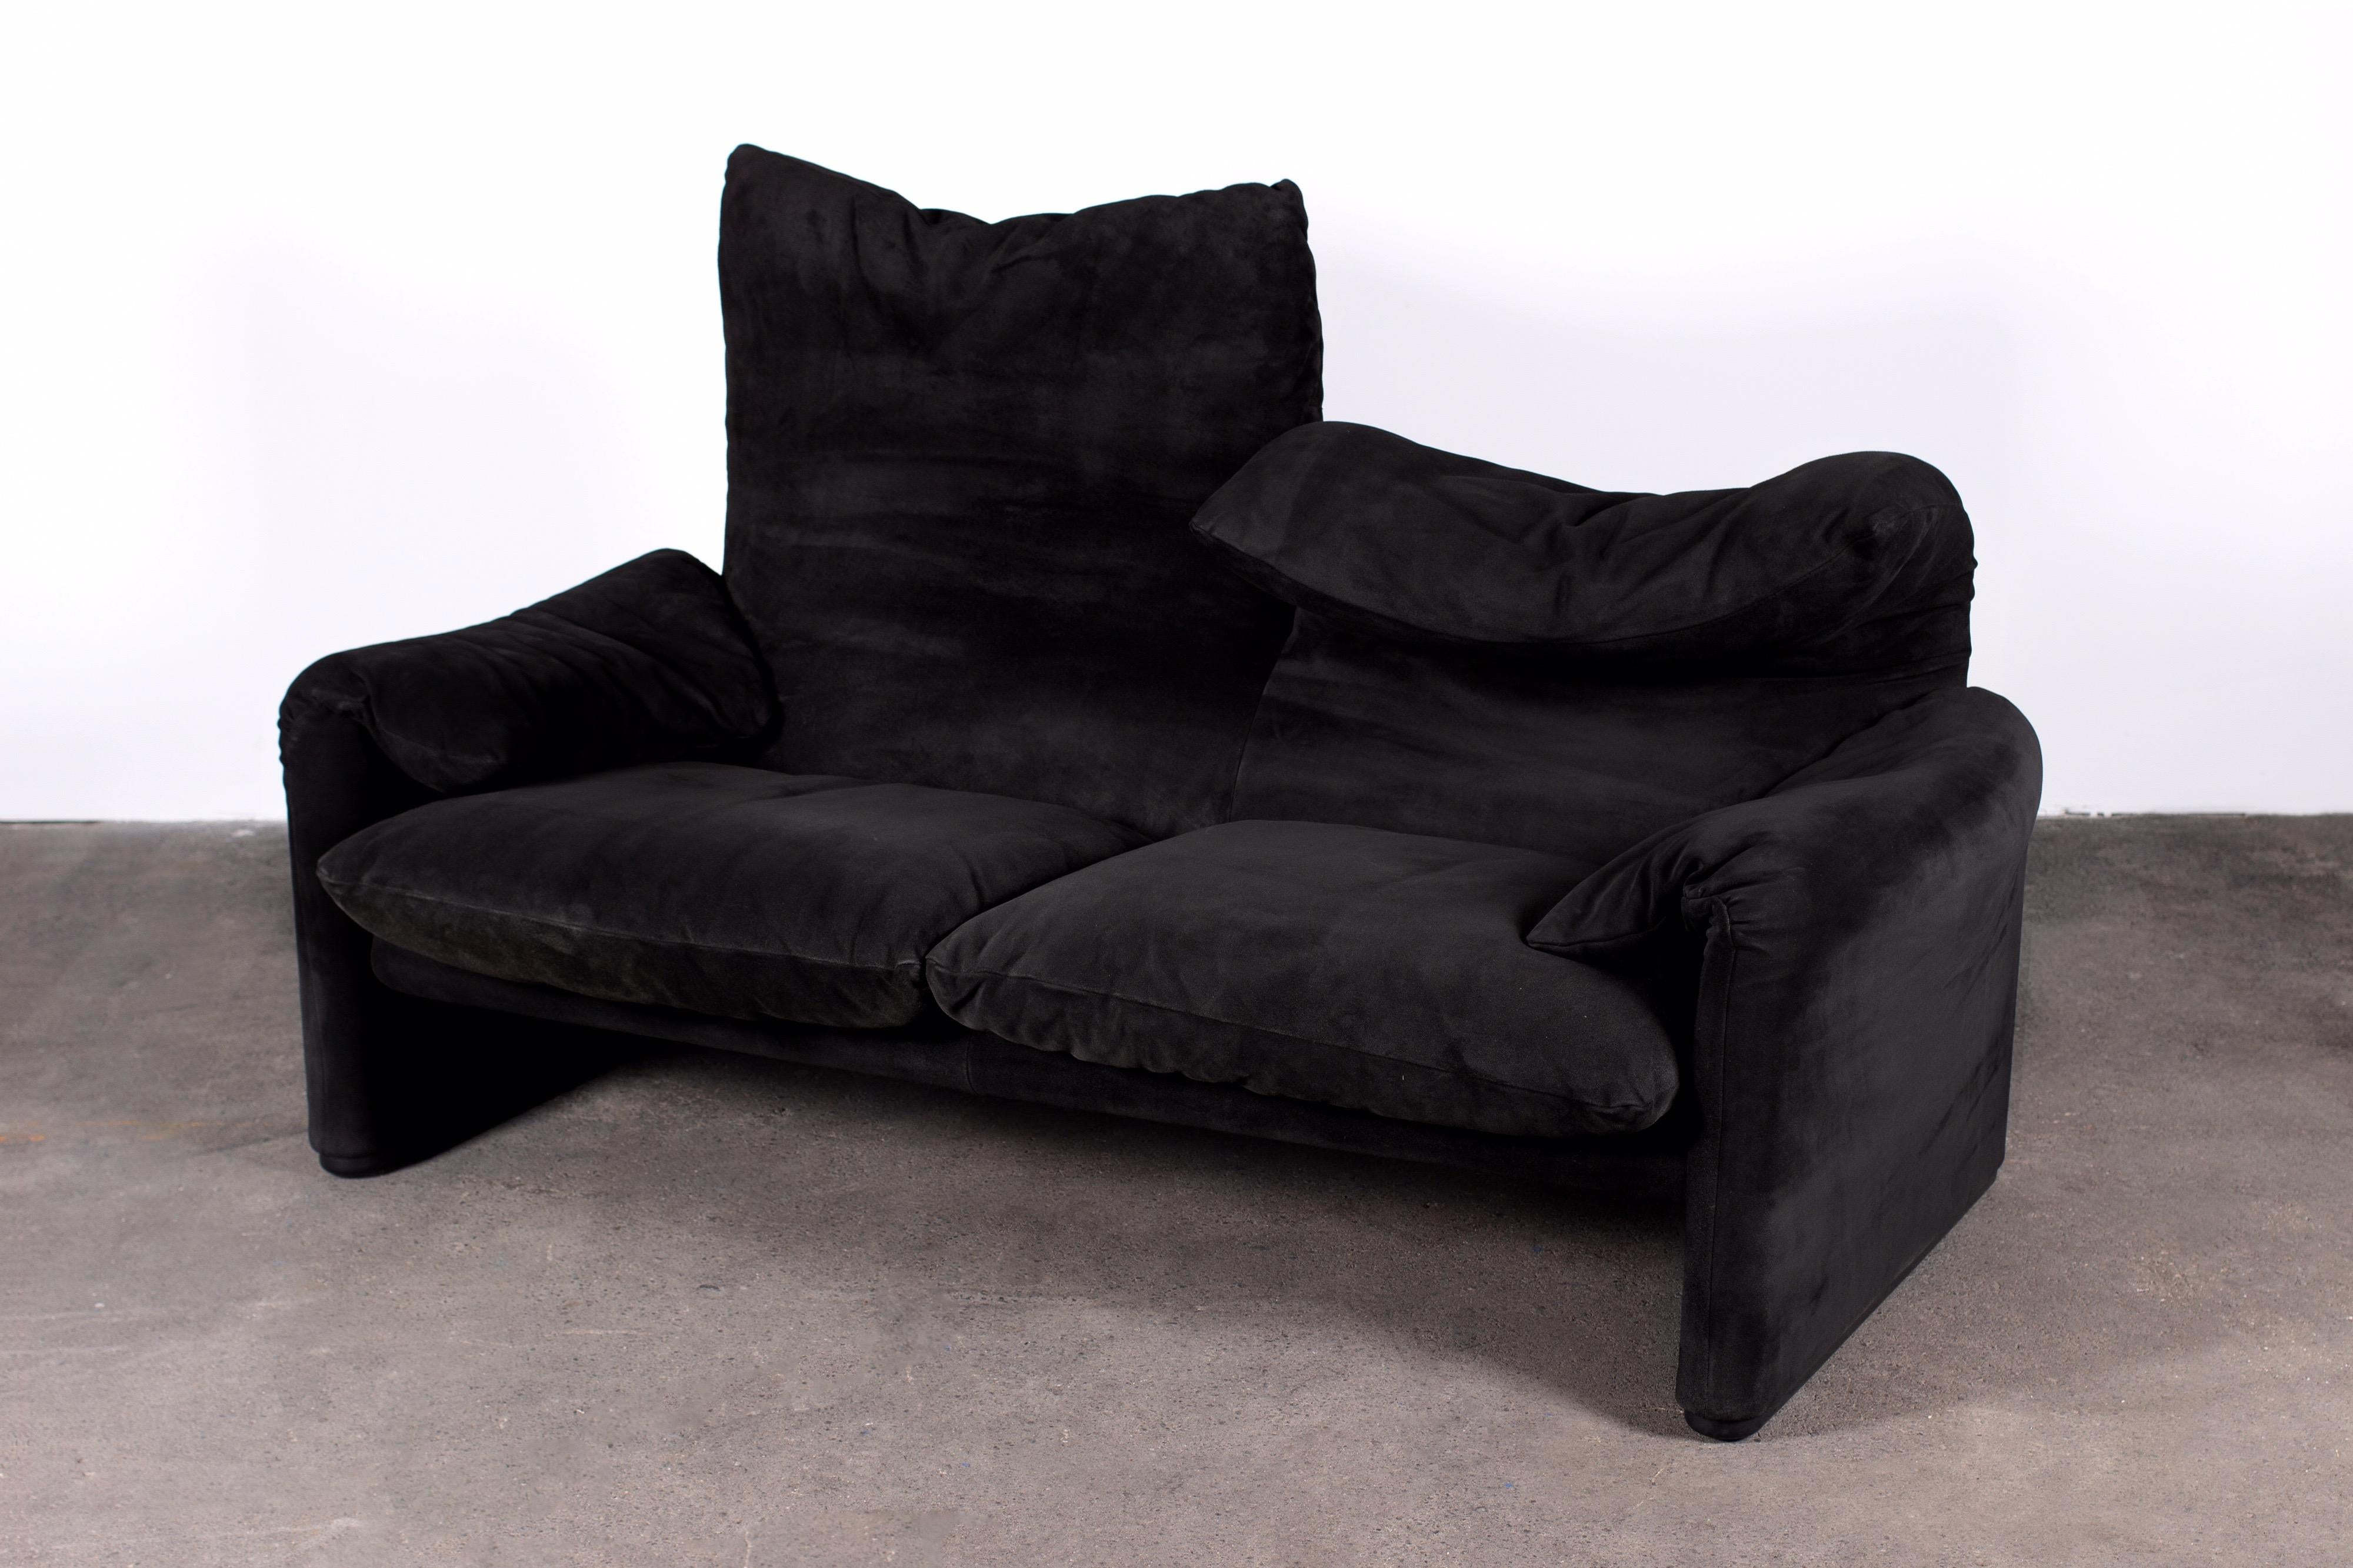 Pair of Black Suede 2-Seater Maralunga Sofas by Vico Magistretti for Cassina 9